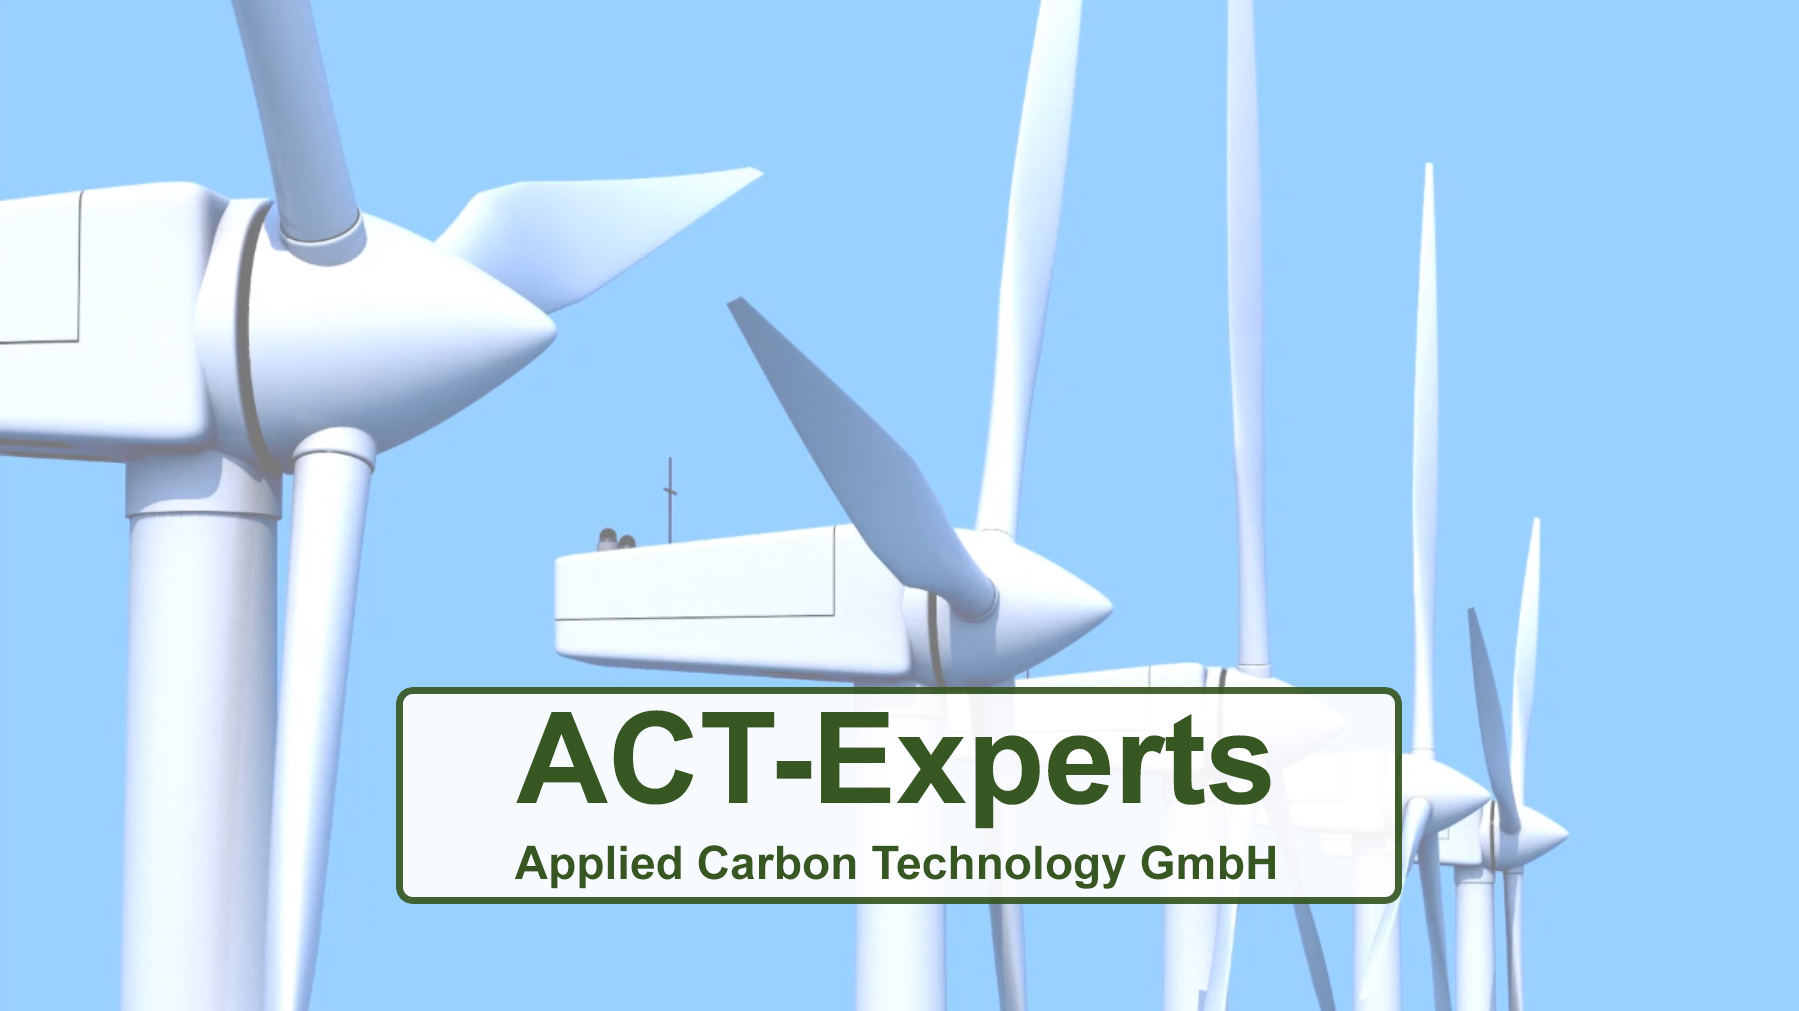 ACT Experts